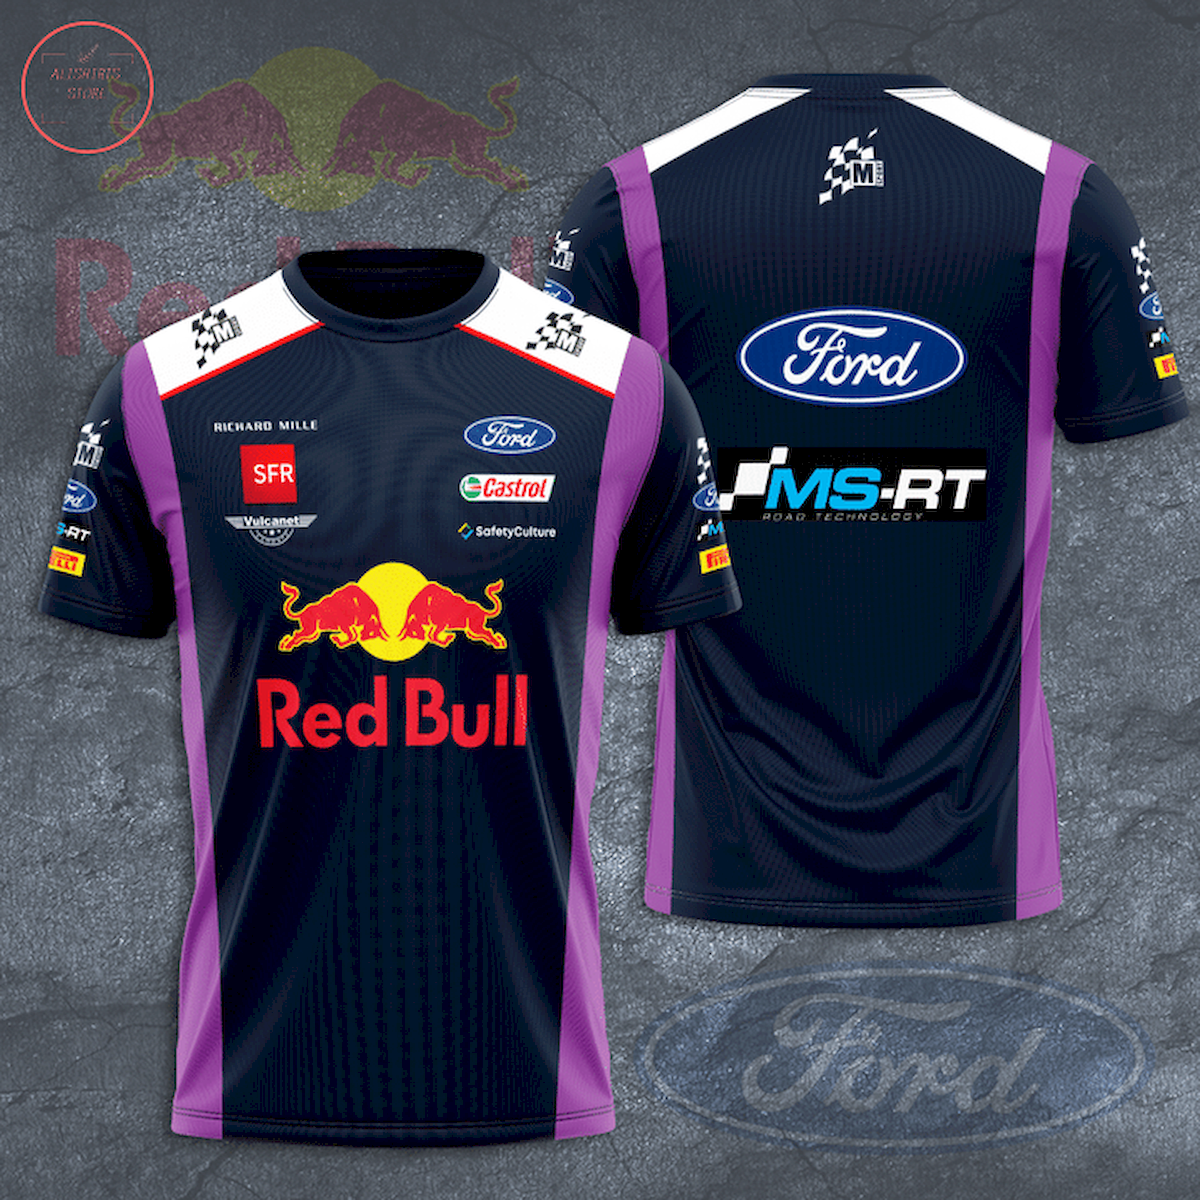 Red Bull Ford MS-RT Road Technology T-shirt 3d